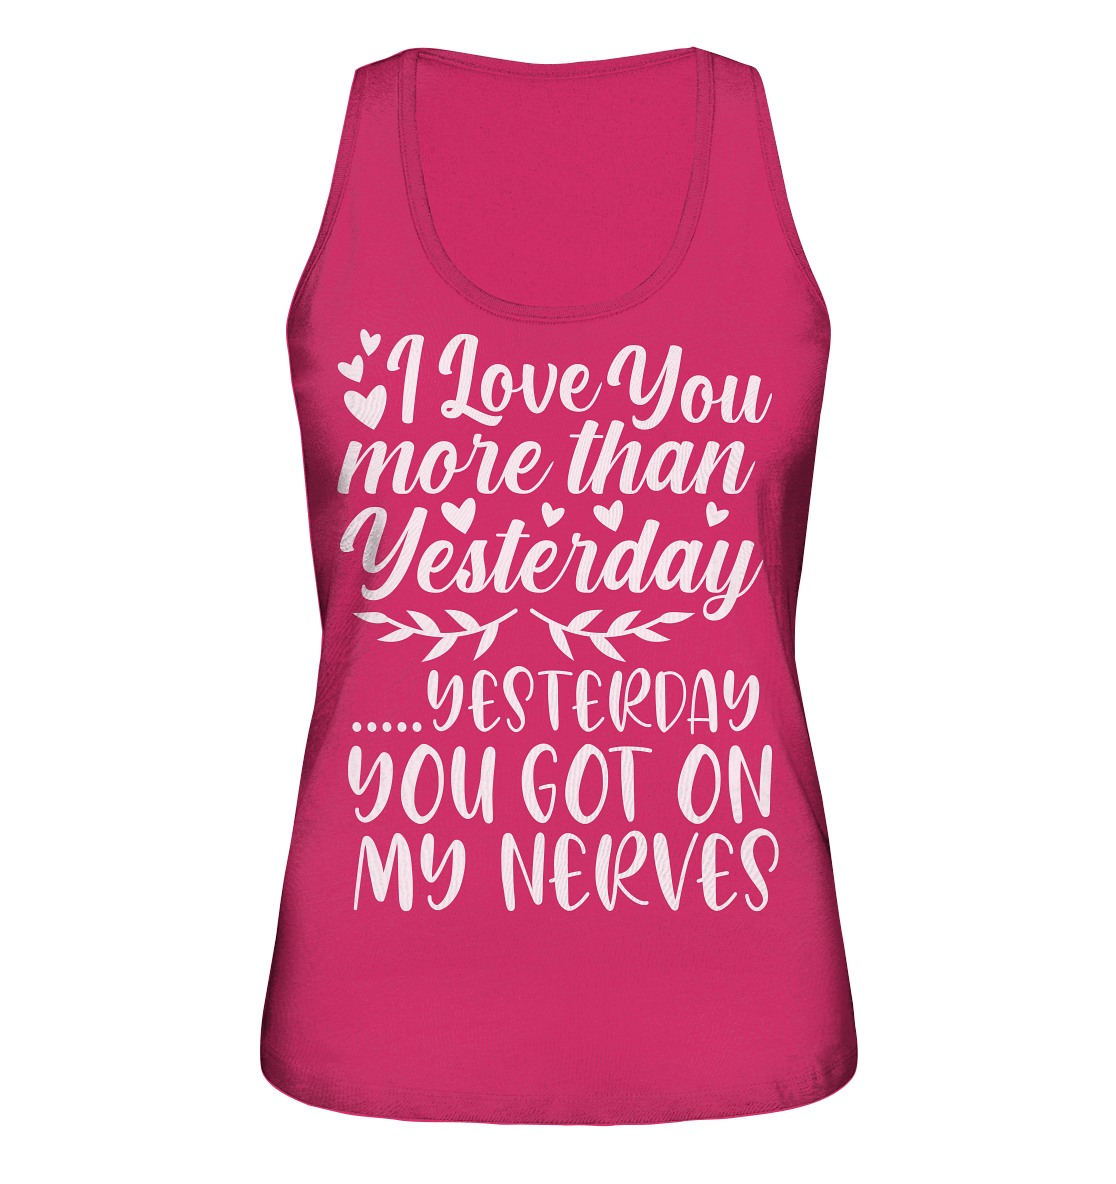 I love you more than yesterday  - Ladies Organic Tank-Top